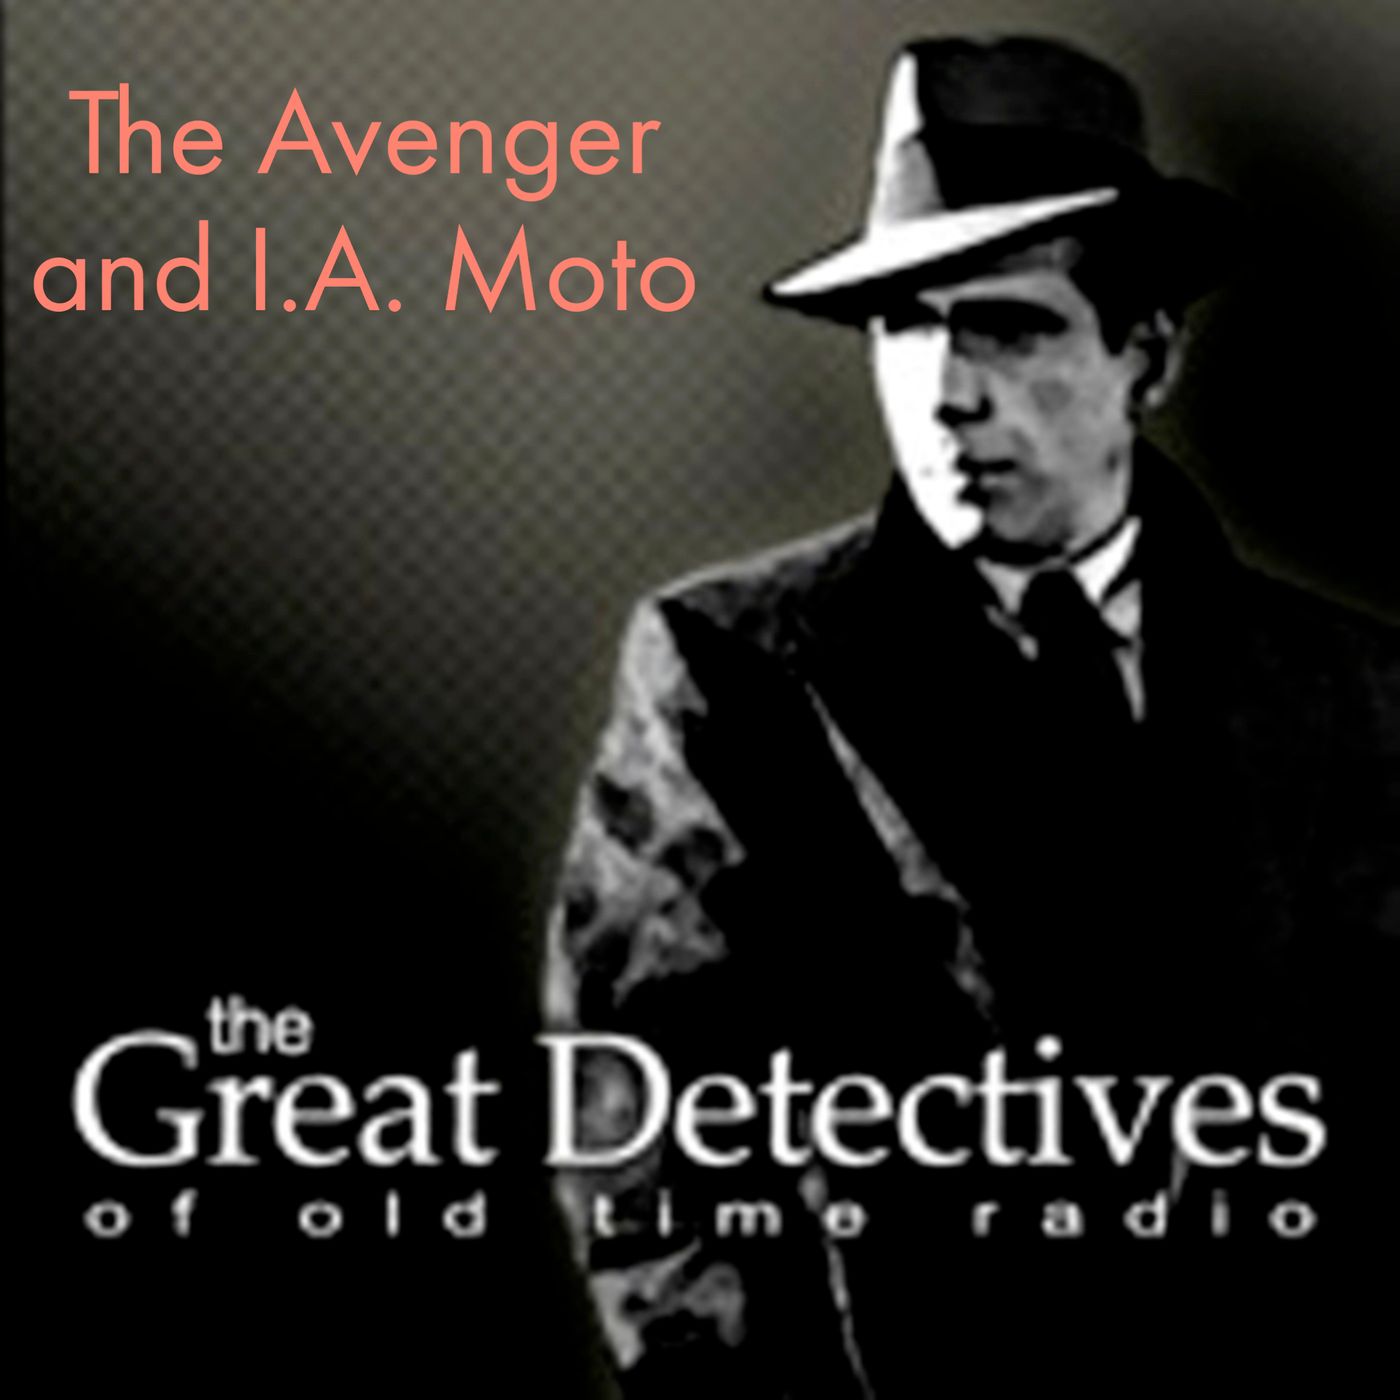 The Avenger and I.A. Moto – The Great Detectives of Old Time Radio